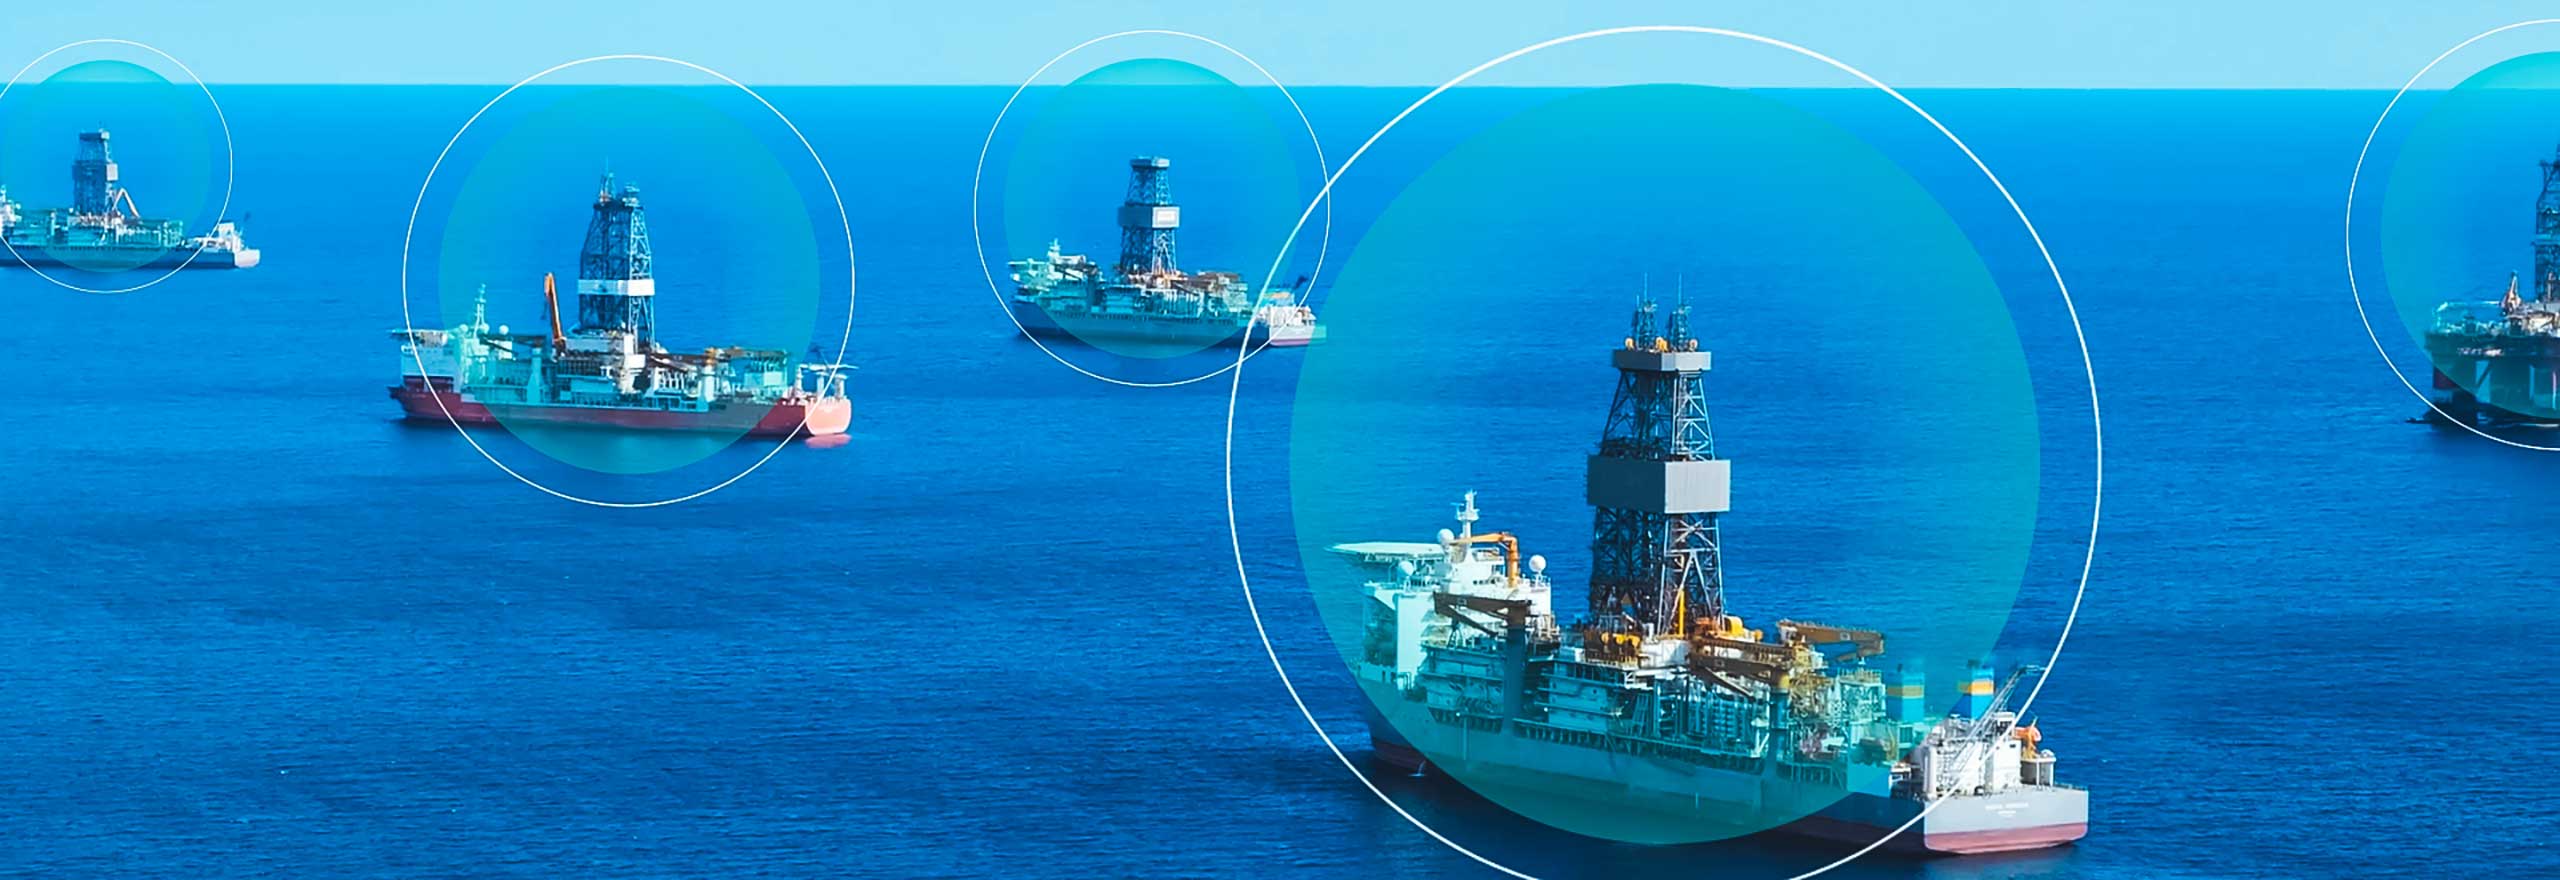 A series of dynamic positioning (DP) drilling vessels shown on a calm blue ocean